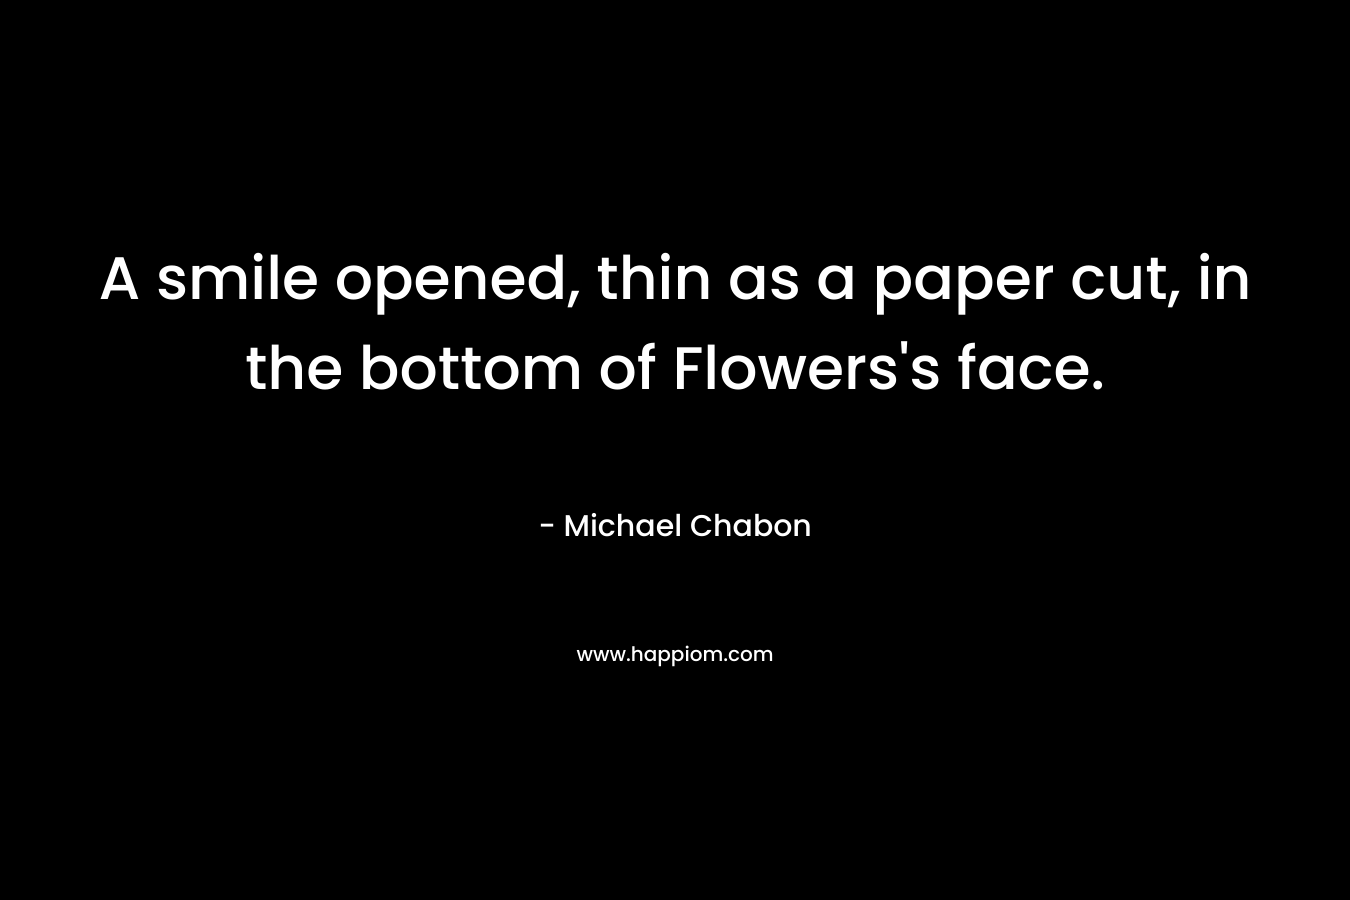 A smile opened, thin as a paper cut, in the bottom of Flowers’s face. – Michael Chabon